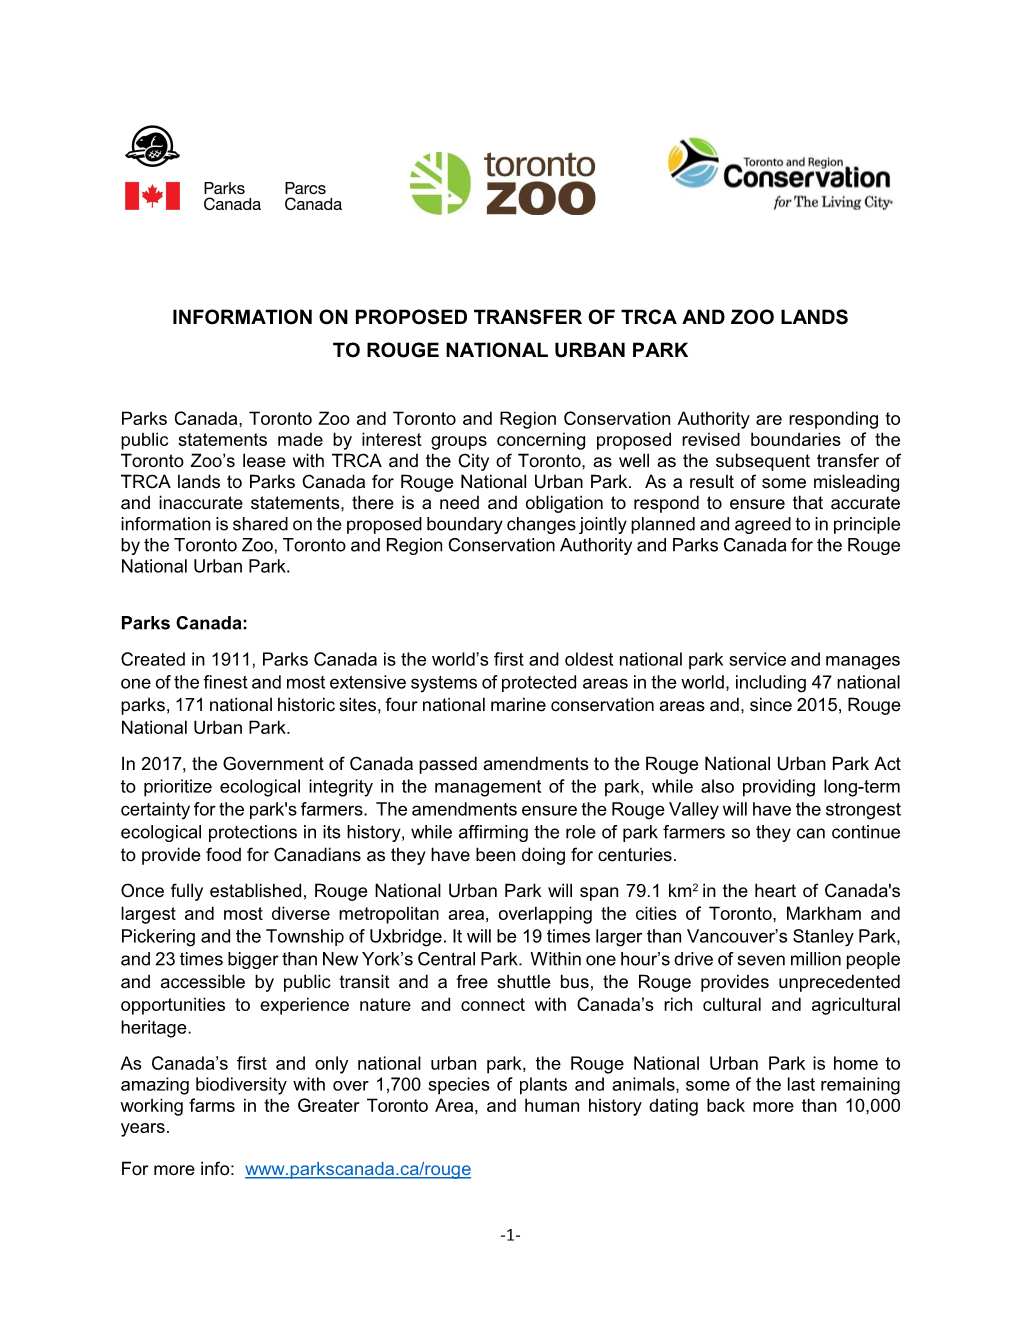 Information on Proposed Transfer of Trca and Zoo Lands to Rouge National Urban Park